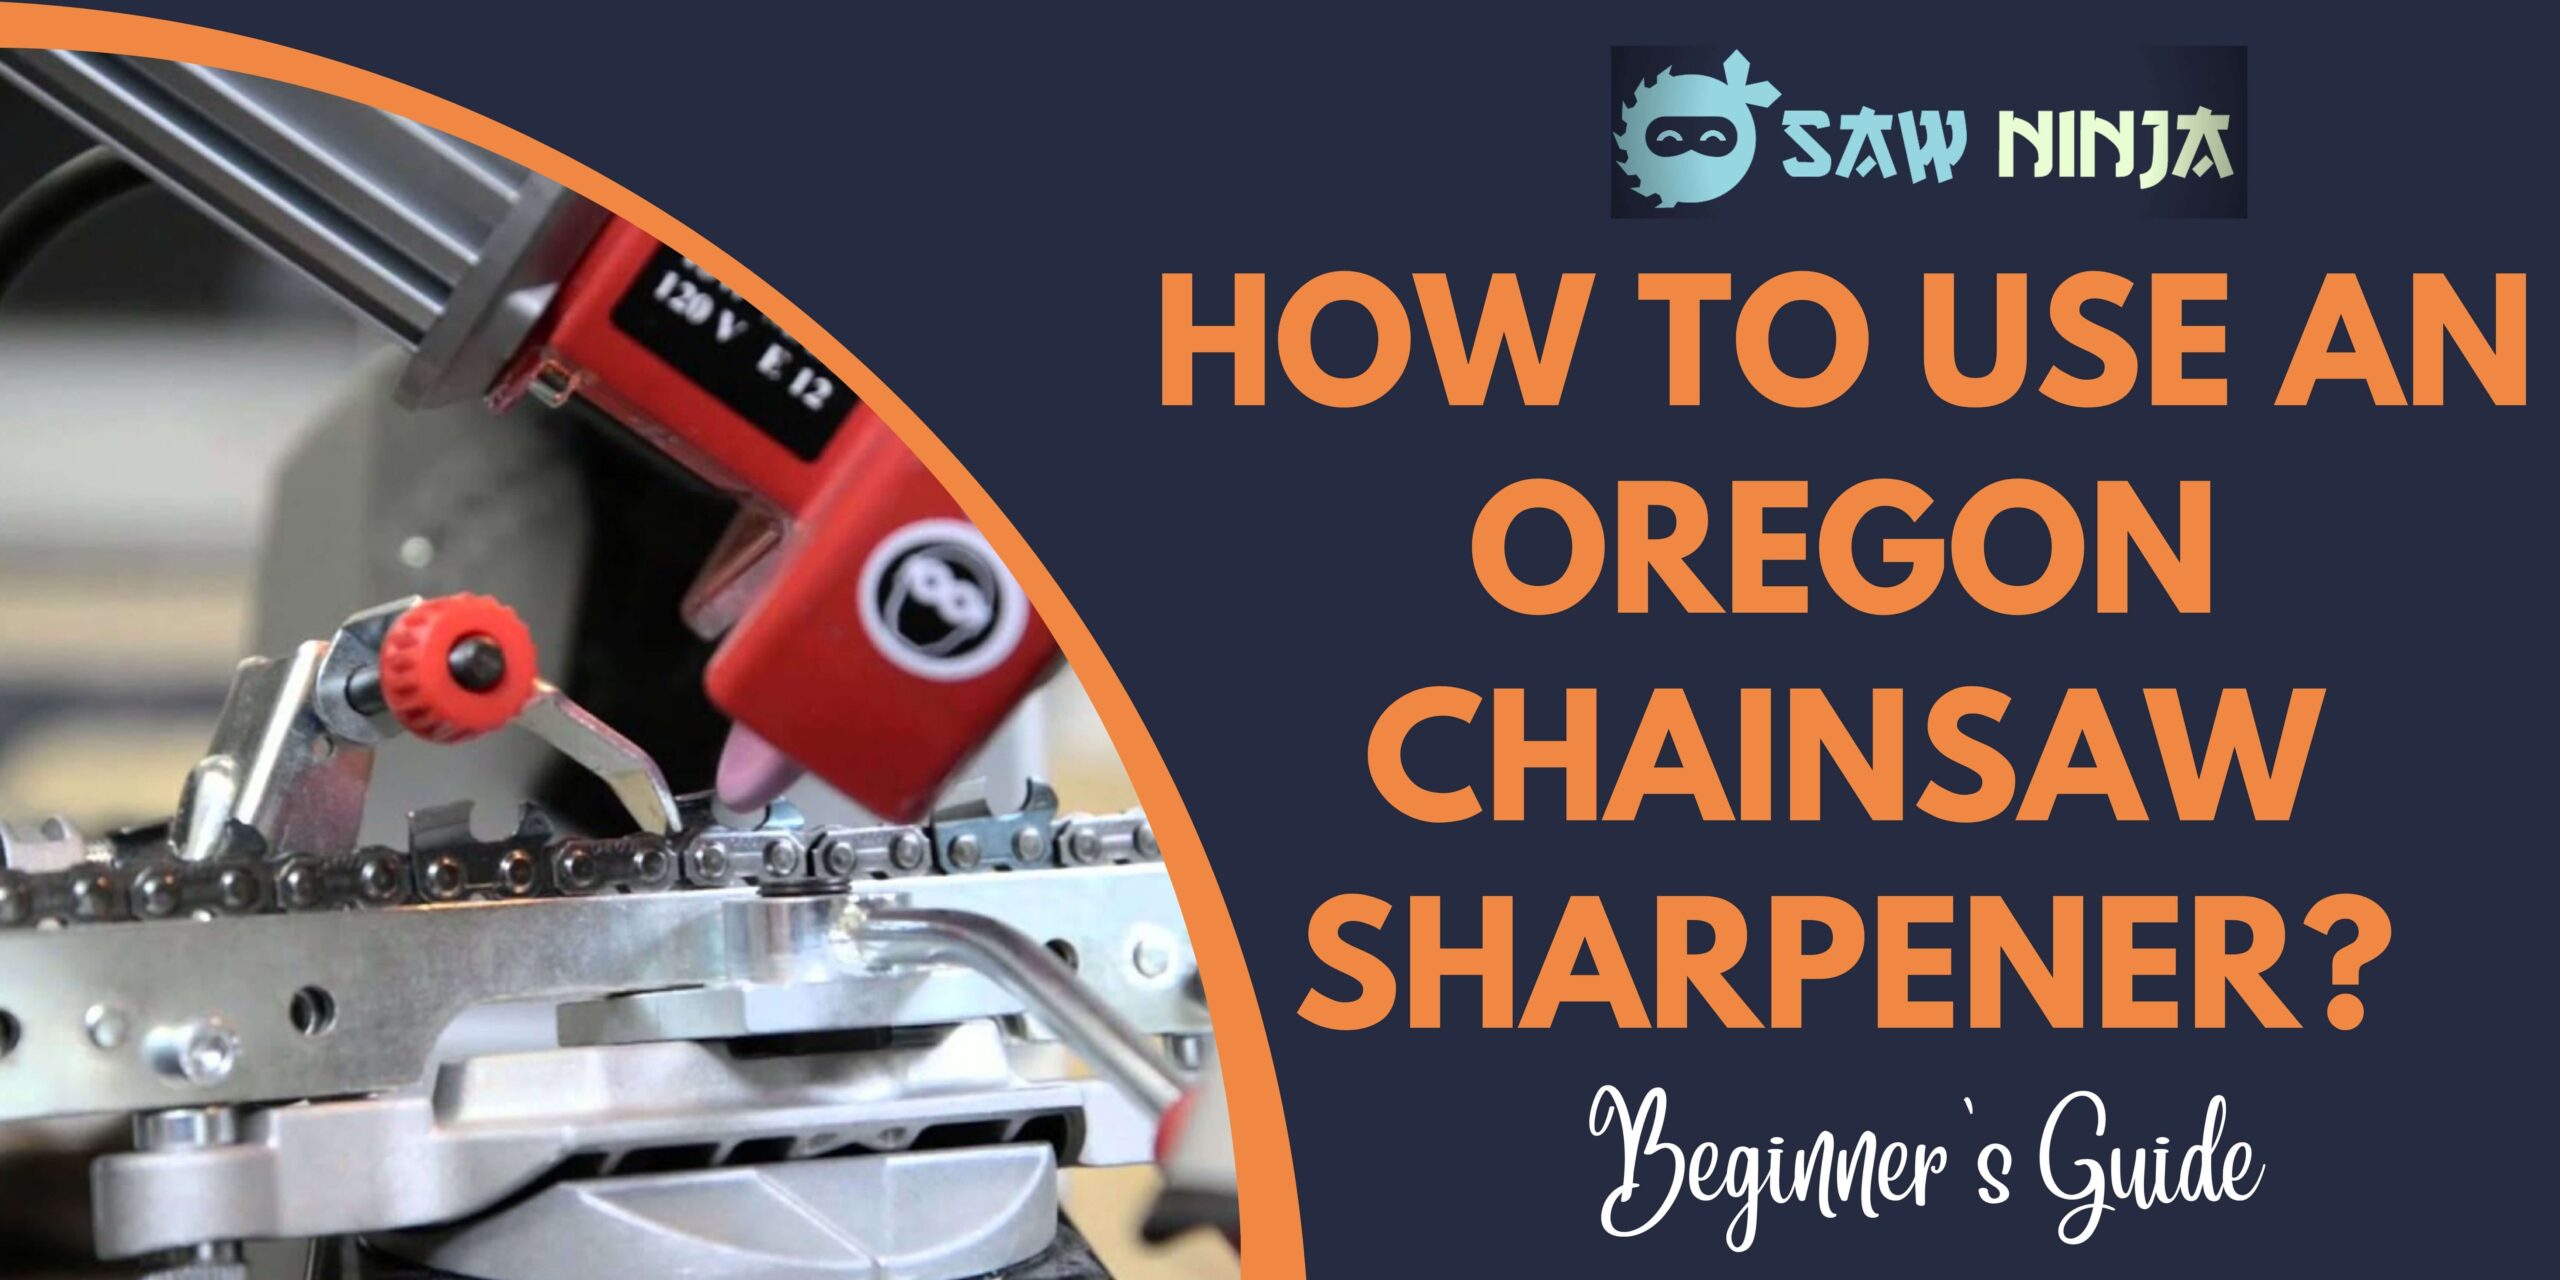 How to Use an Oregon Chainsaw Sharpener